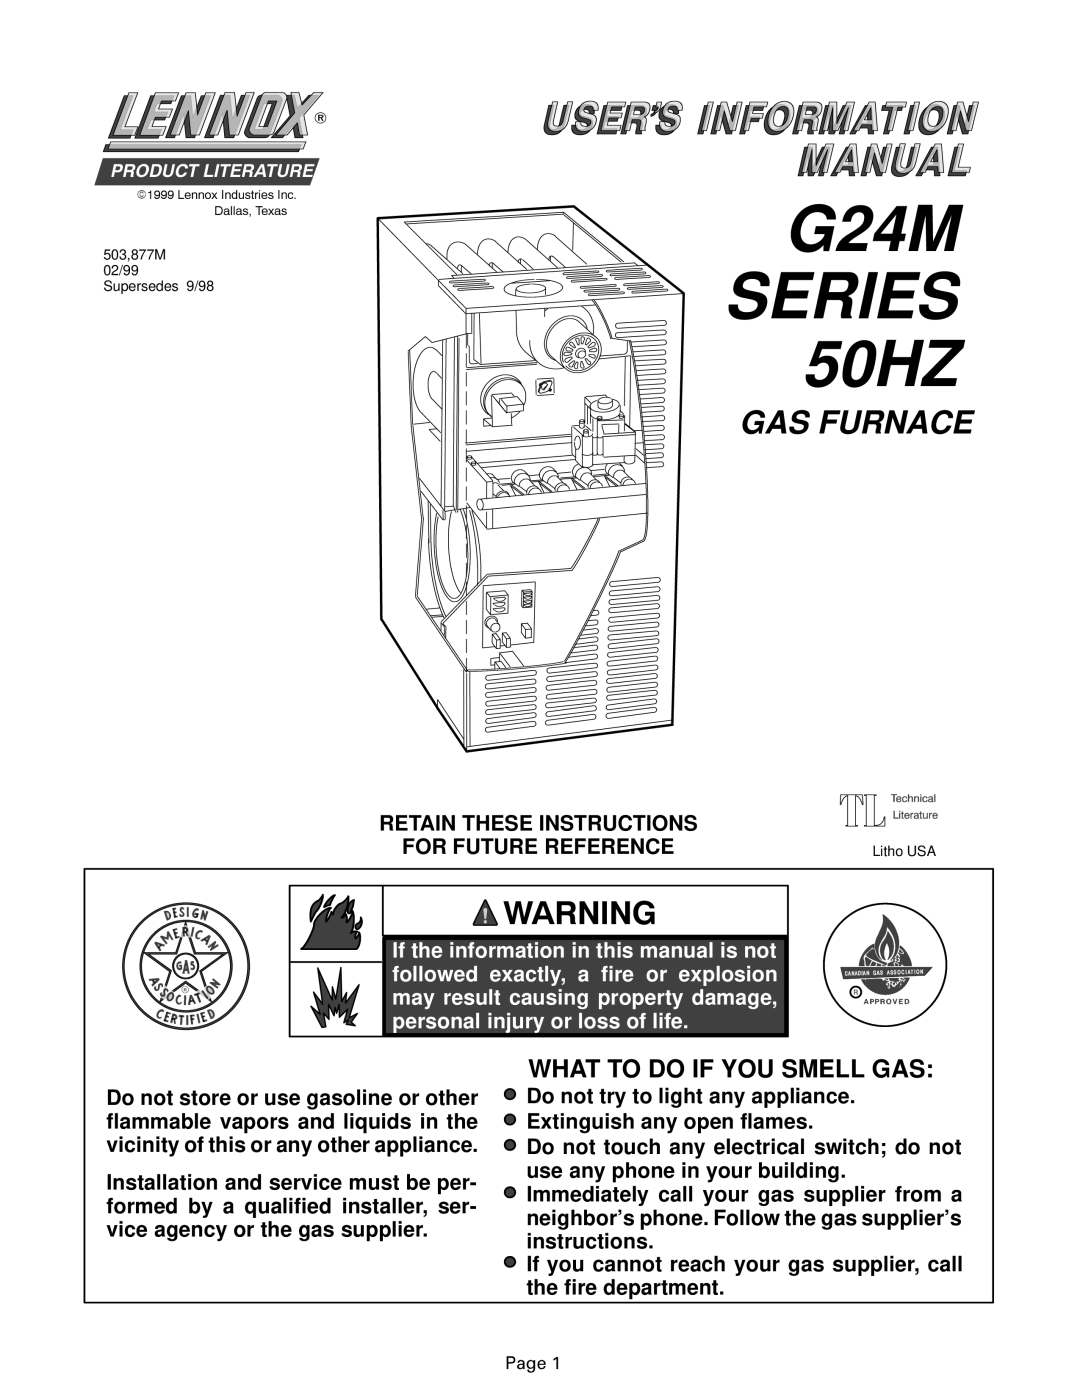 Lennox International Inc manual G24M SERIES 50HZ, Gas Furnace, $51,1, What To Do If You Smell Gas 